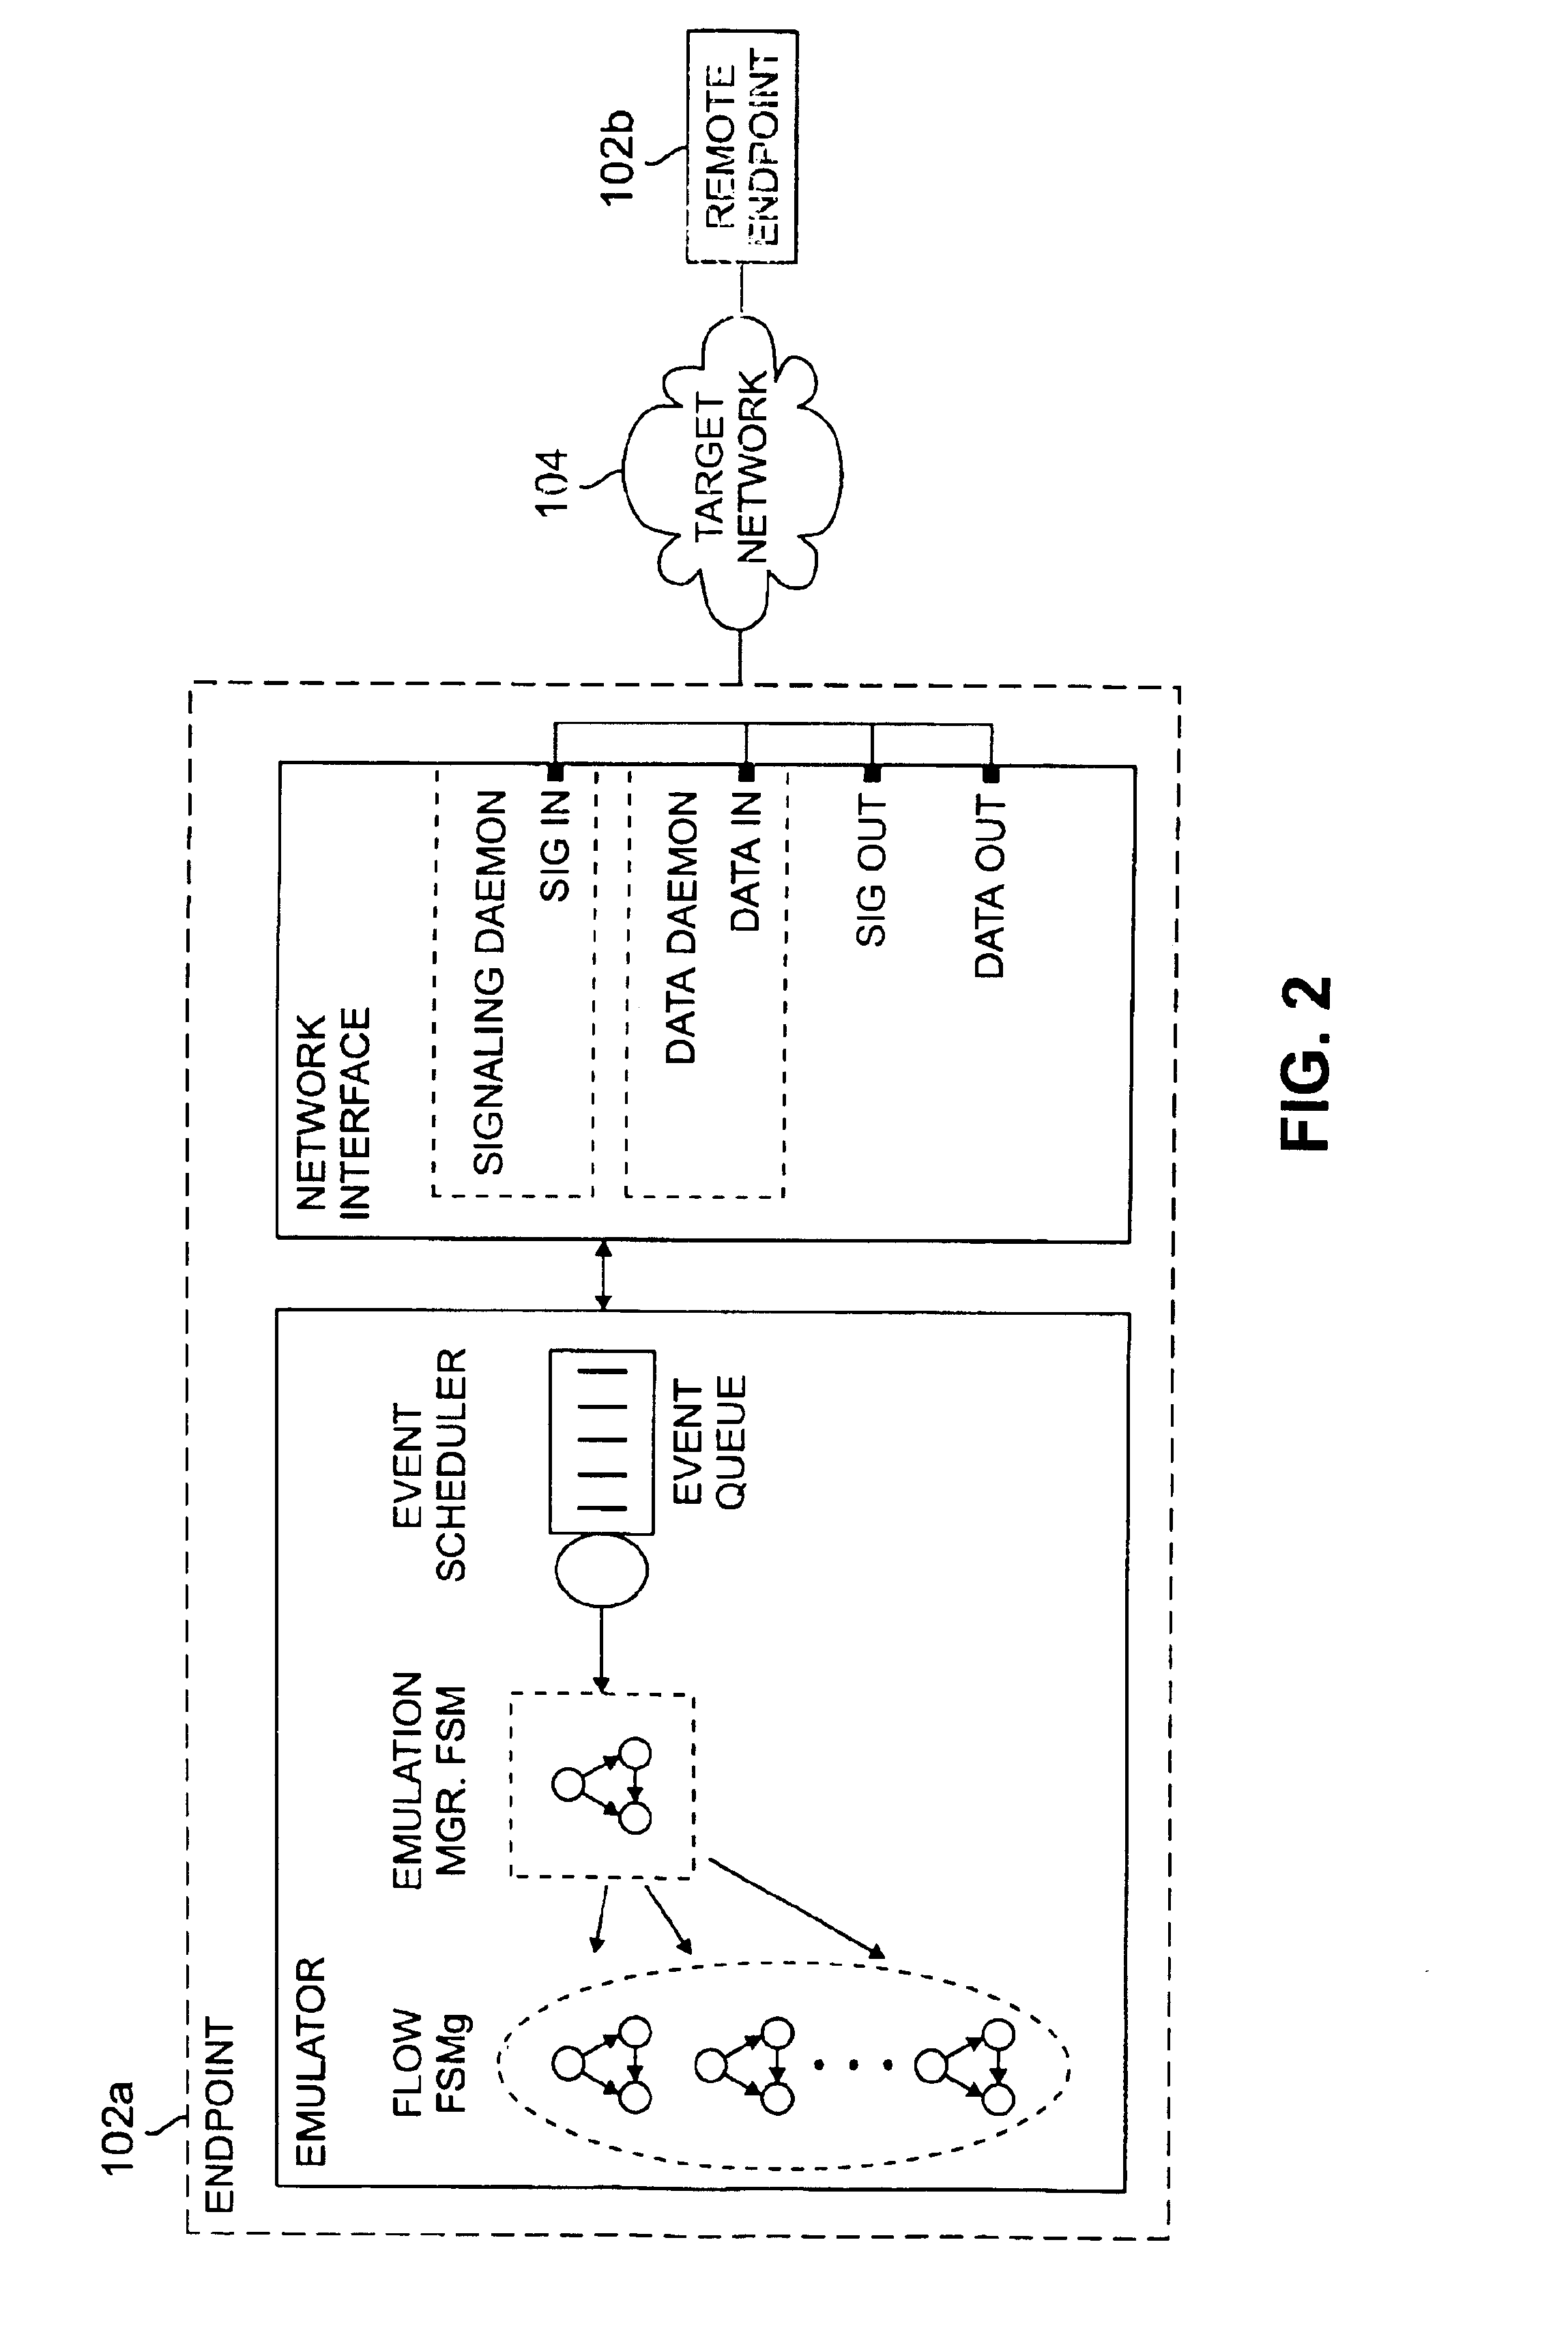 Framework for flexible and scalable real-time traffic emulation for packet switched networks